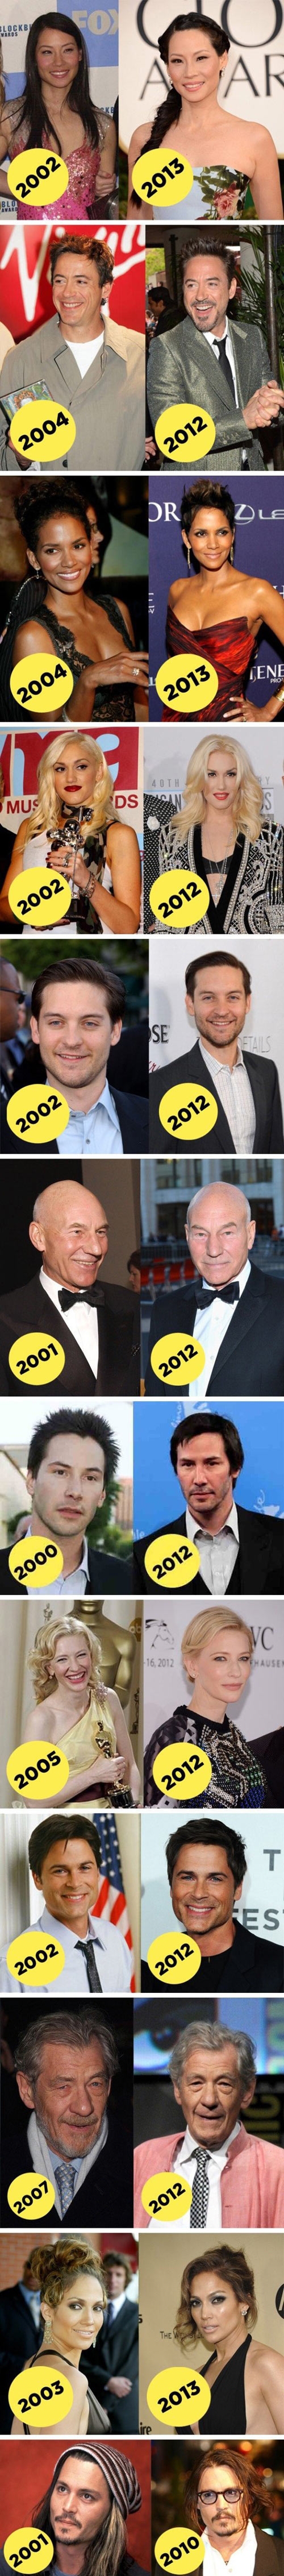 Celebrities aging gracefully.